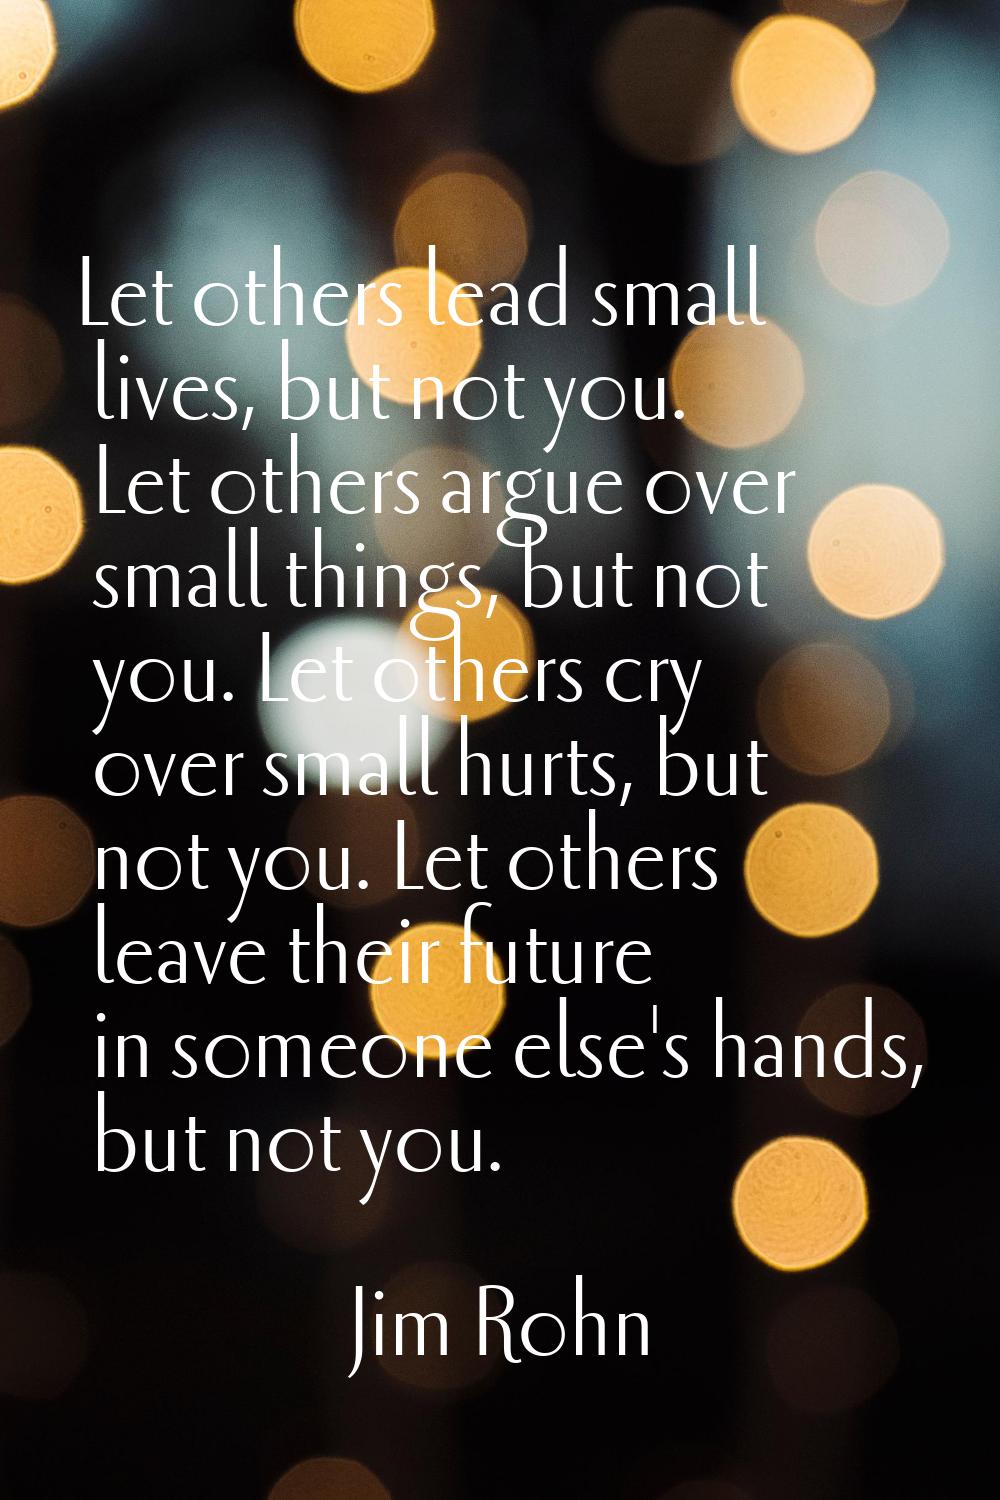 Let others lead small lives, but not you. Let others argue over small things, but not you. Let othe